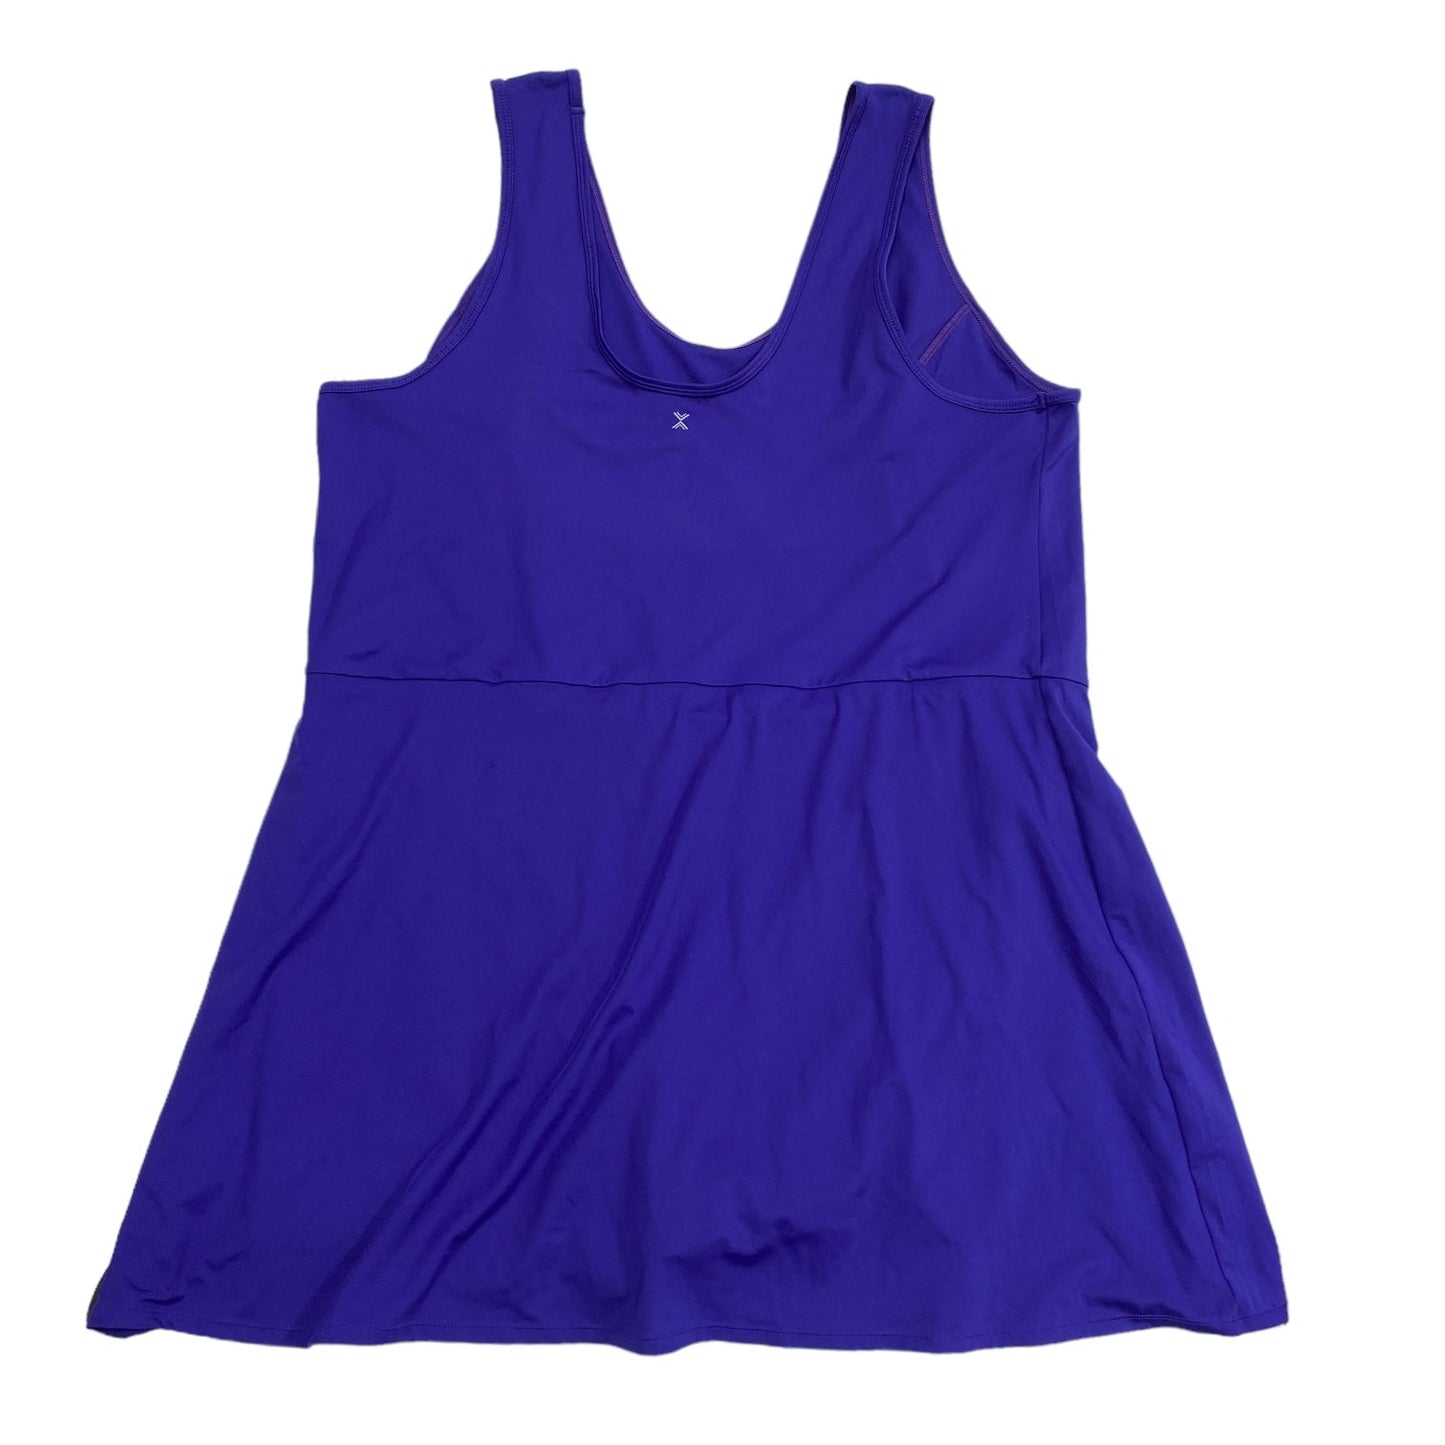 Athletic Dress By Xersion  Size: 2x